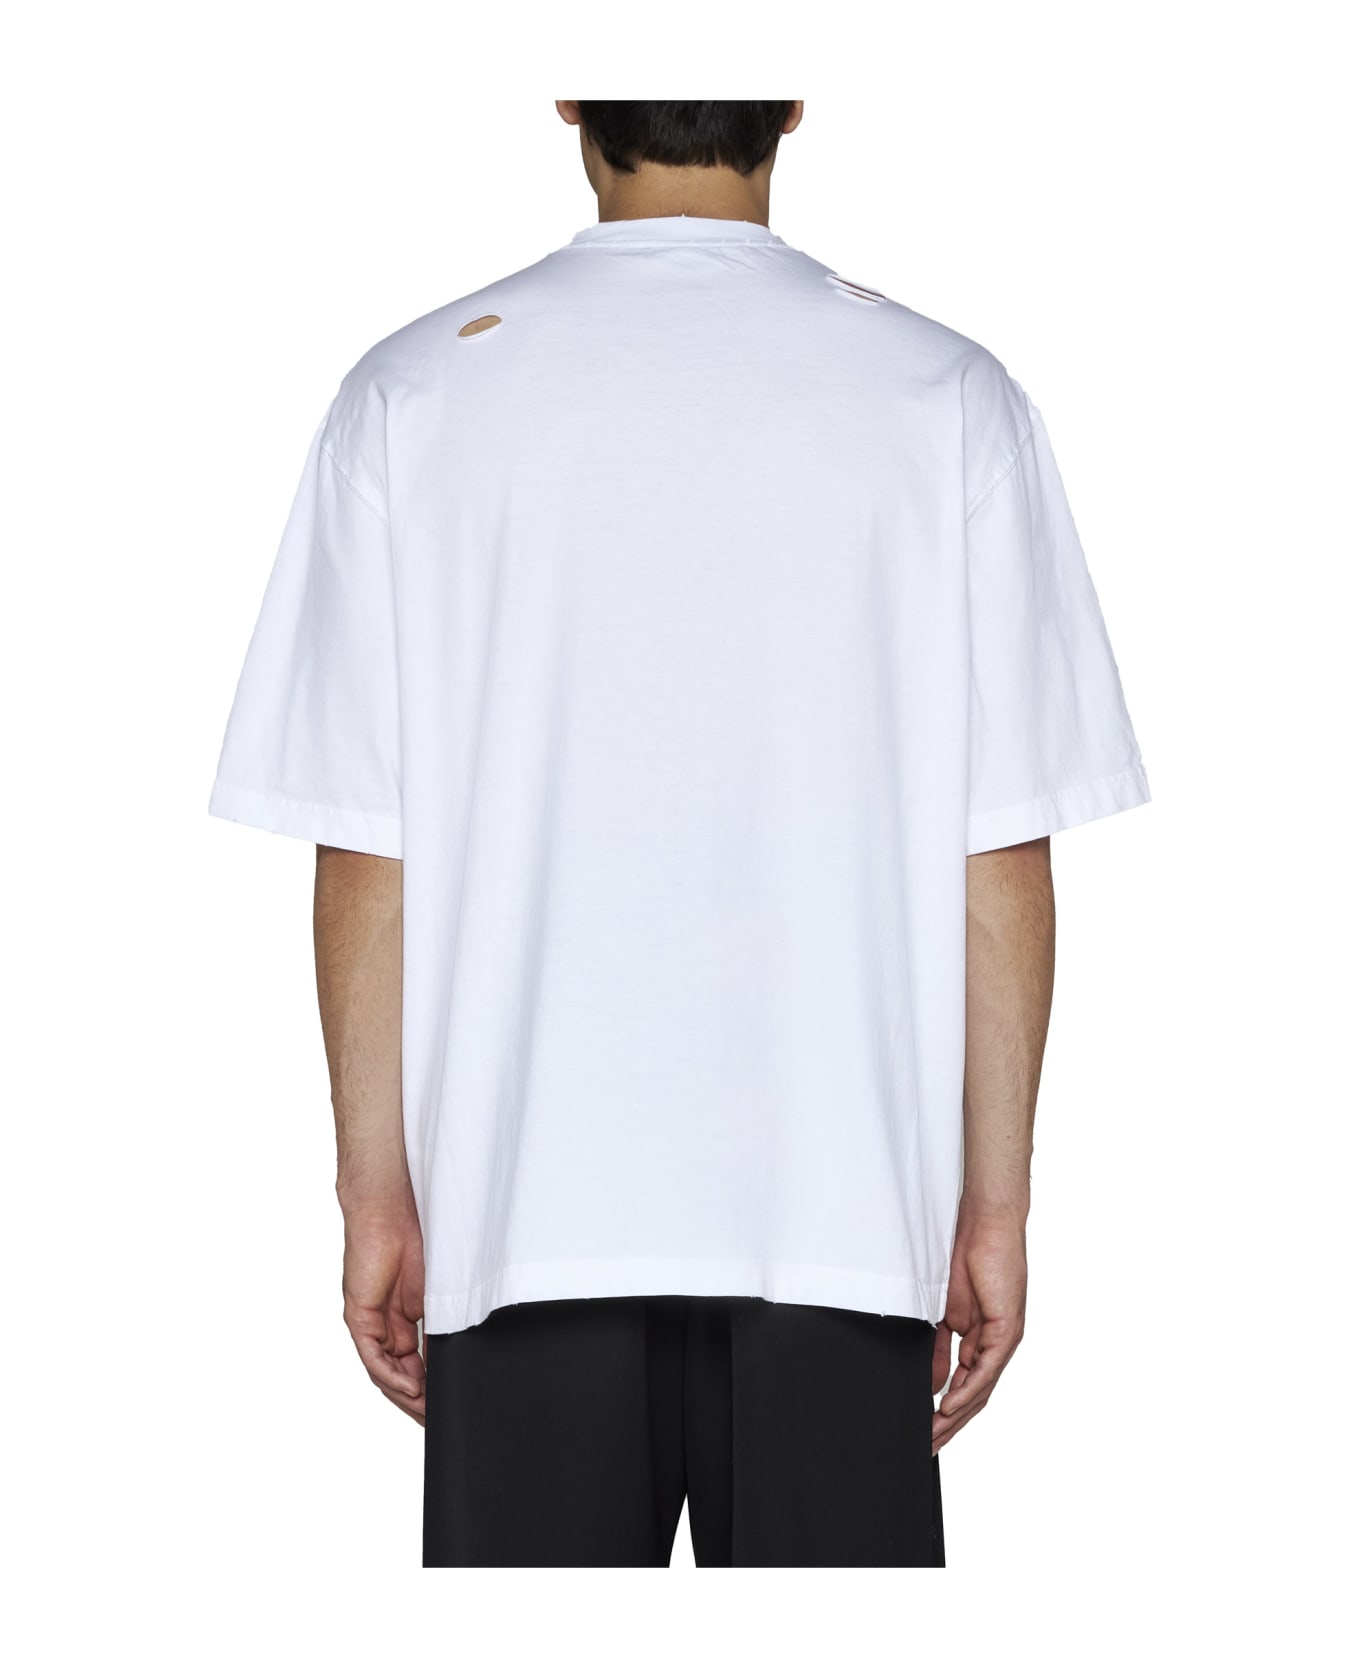 WE11 DONE T-Shirt - White シャツ